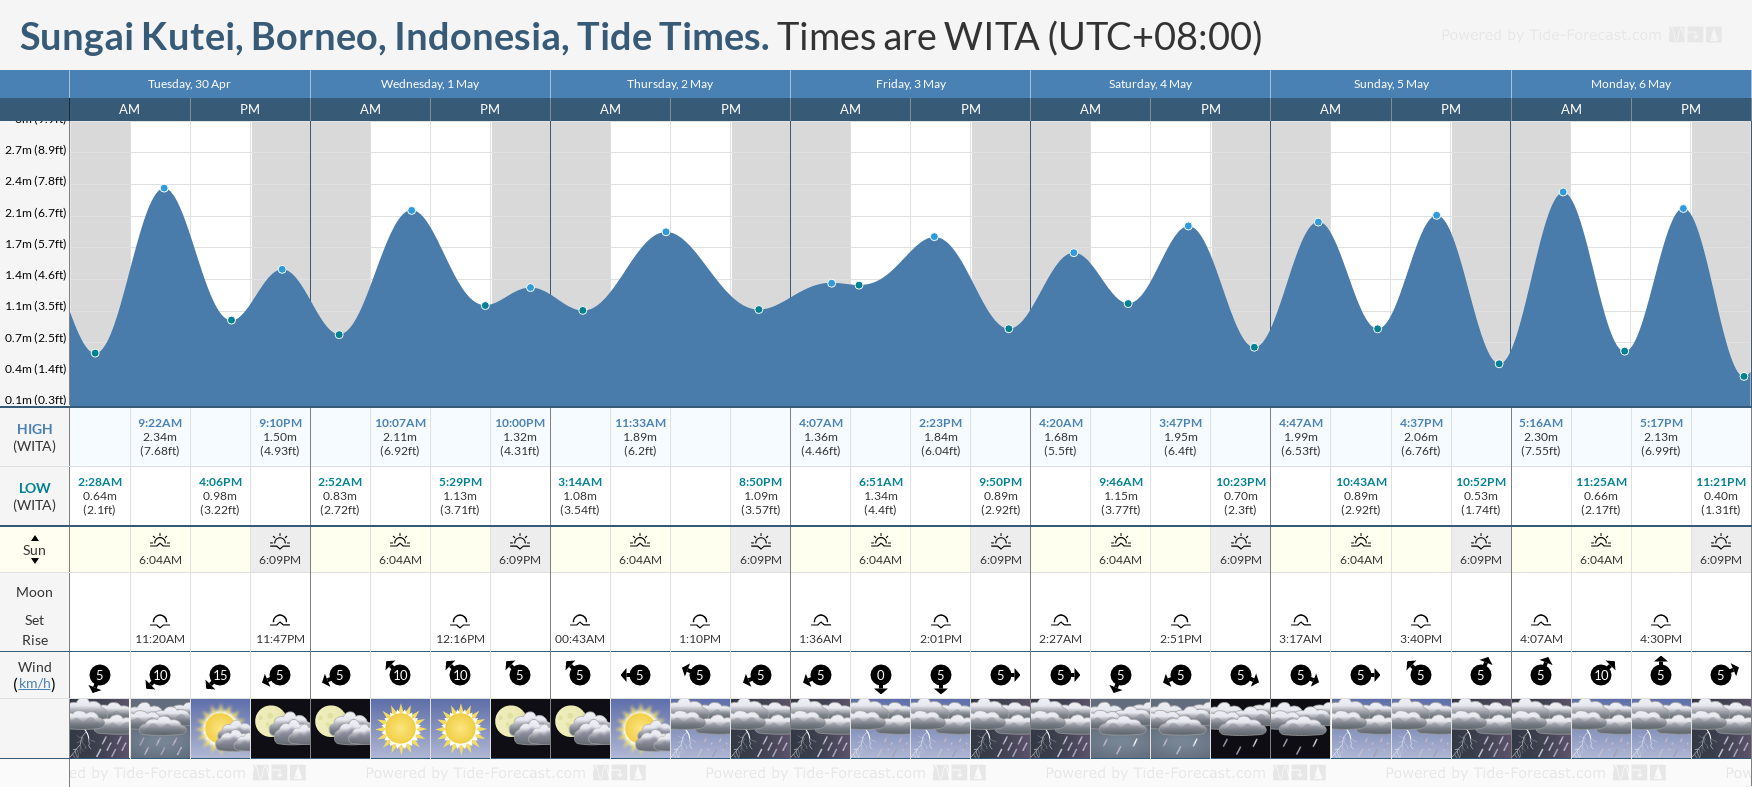 Sungai Kutei, Borneo, Indonesia Tide Chart including high and low tide times for the next 7 days